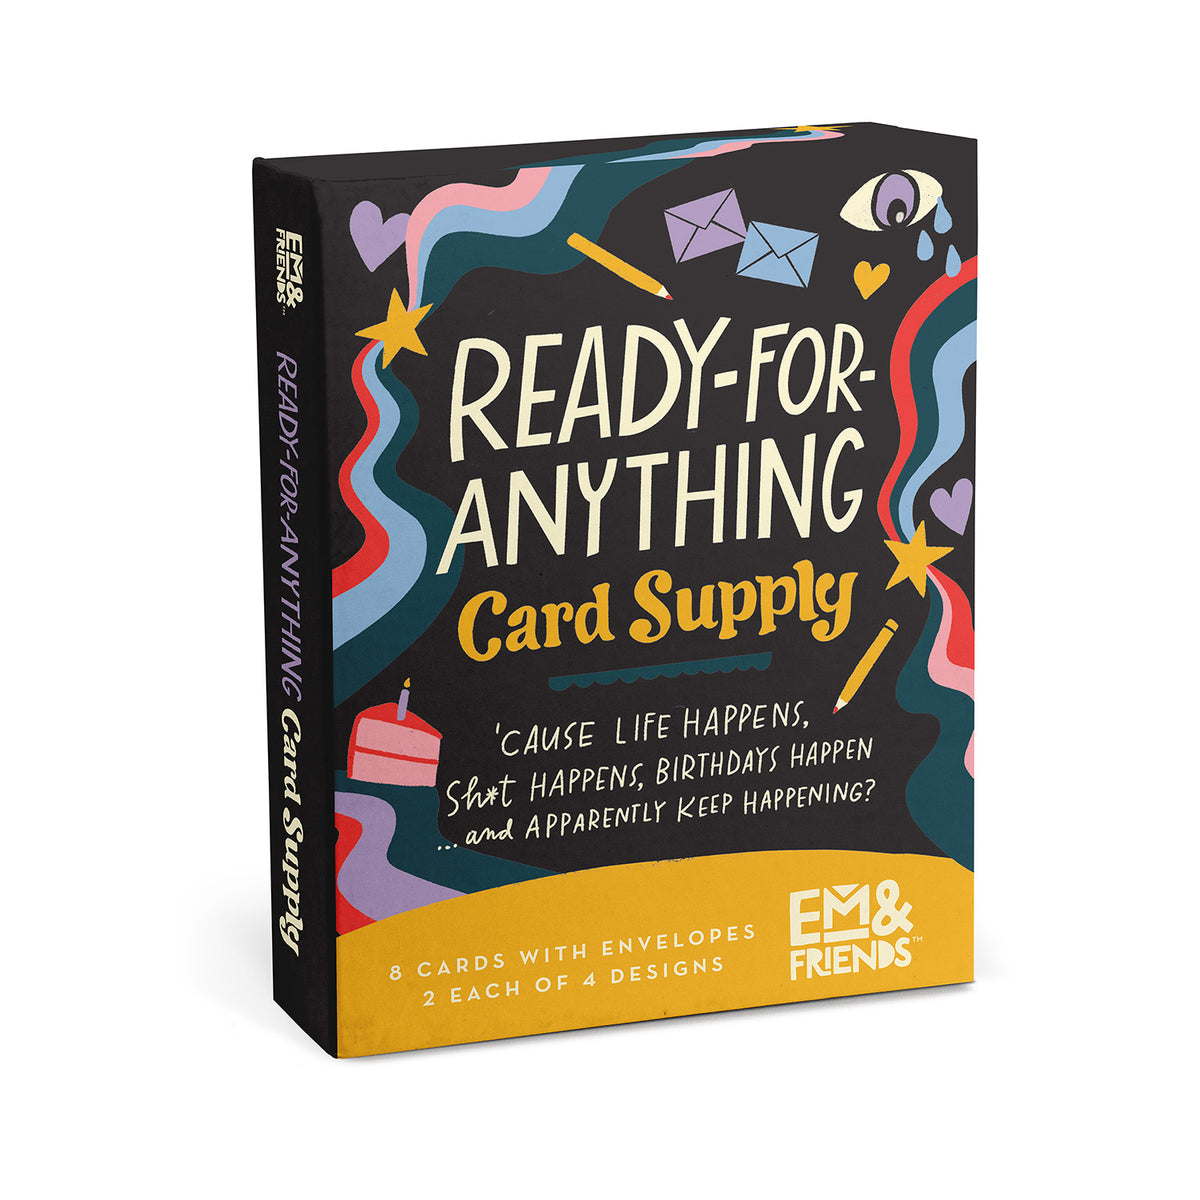 Ready-for-Anything Emily McDowell Card Boxed Set